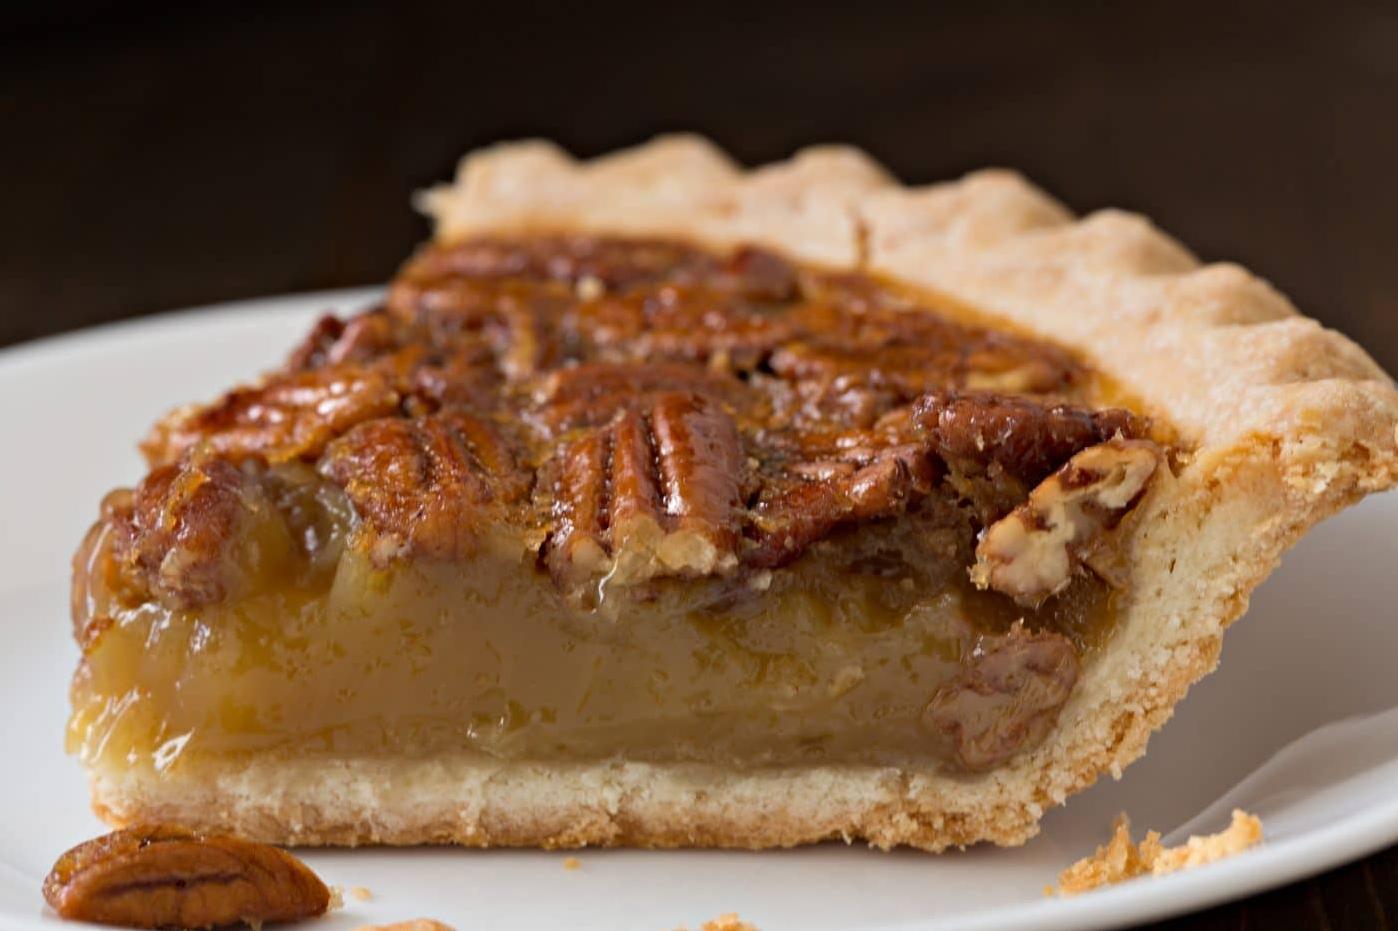 Satisfy Your Cravings with this Delicious Pecan Pie Recipe